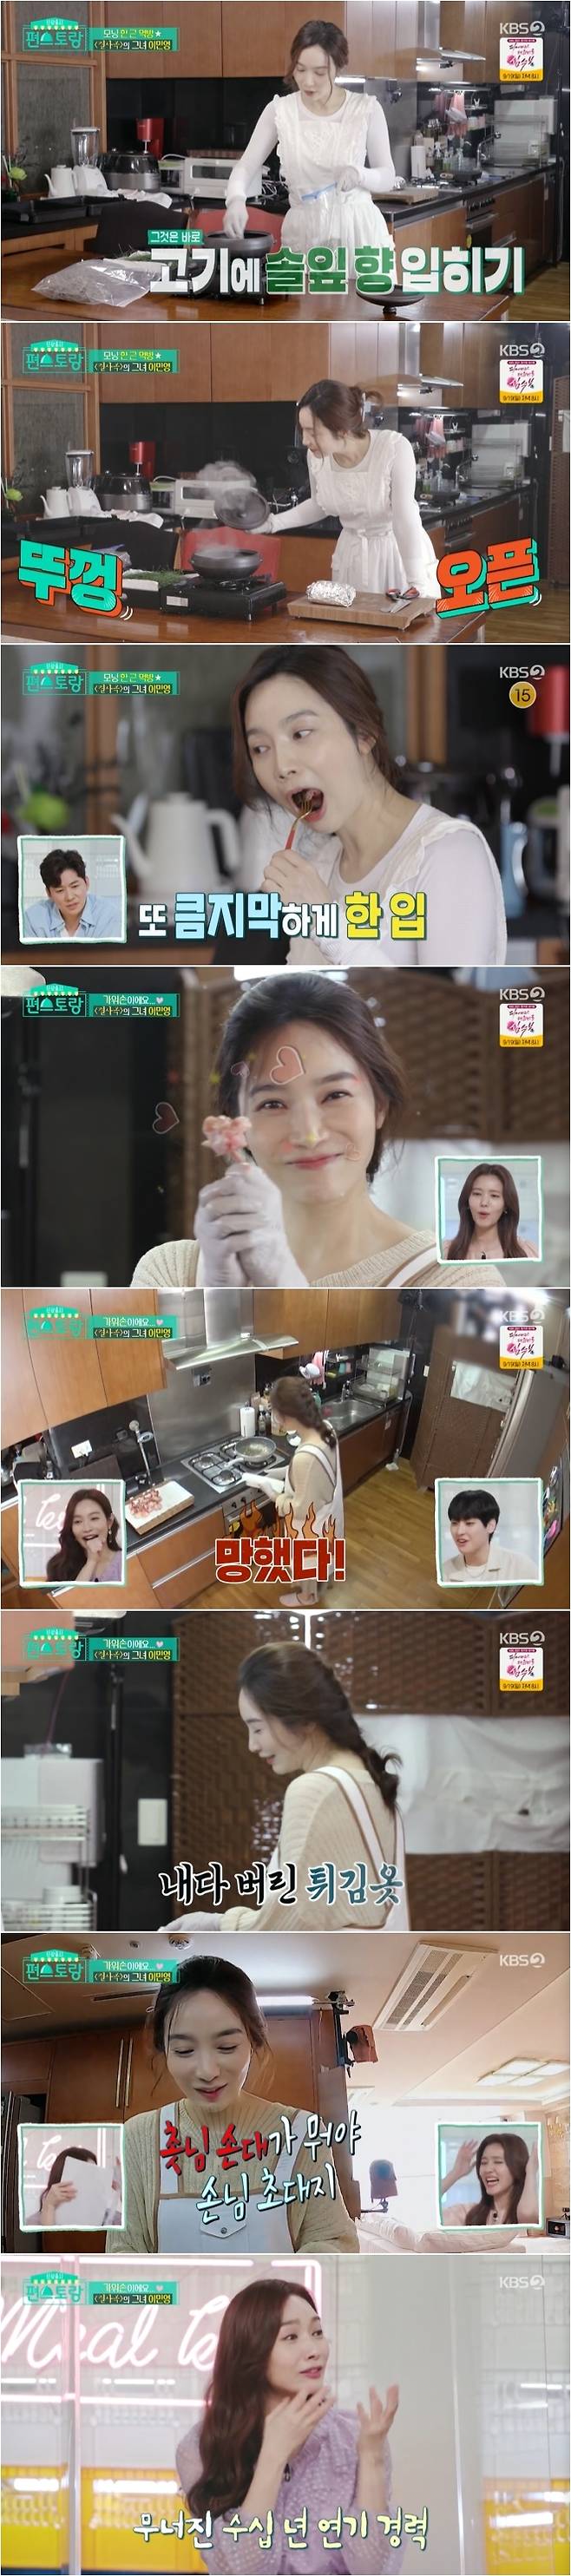 Lee Min-young has revealed the ability of Coriander in Pilates 20 years to eat a Meat root.Actor Lee Min-young appeared on KBS 2TV Stars Top Recipe at Fun-Staurant broadcast on September 17 and caught the attention of viewers.Lee Min-young, who is the first to show his cooking skills as well as his daily life, said, I have lived with my parents for seven years and my parents have been living alone for a year.In fact, Lee Min-young was using antique furniture that was completely different from sophisticated image such as a large wooden bed, and explained, It is what my parents left behind.Jung Hoon responded, I was really curious about my age when I saw the furniture.Lee Min-youngs daily life was different afterward: he did Pilates as an empty stomach as soon as he woke up in the morning.The appearance of the Pilates equipment at home and the exercise was attracted attention.Lee Min-young said, I have been doing Pilates for 20 years. I started Pilates because I liked to do it alone rather than exercise with people, but I started it well.The movements that showed were enough to impress.Lee Min-young, who caused the audiences Furious by taking on the character of the adulterous woman Songwon of the main character in the drama Marriage Writer Divorce Composition which collected the topic recently.However, Lee Min-youngs daily life on the day was a completely different Reversal story from the thin evil character.Lee Min-young, who is in a state of super-tight as it is the first observational entertainment, was surprised to see the cameras installed in the house, and cooked because of the nervousness and made big and small mistakes.In particular, Lee Min-young, who invited Jeon Min and Lee Kyung-ryong to their home in the Marriage Lyrics Divorce Composition, prepared a chicken fried dish for them.